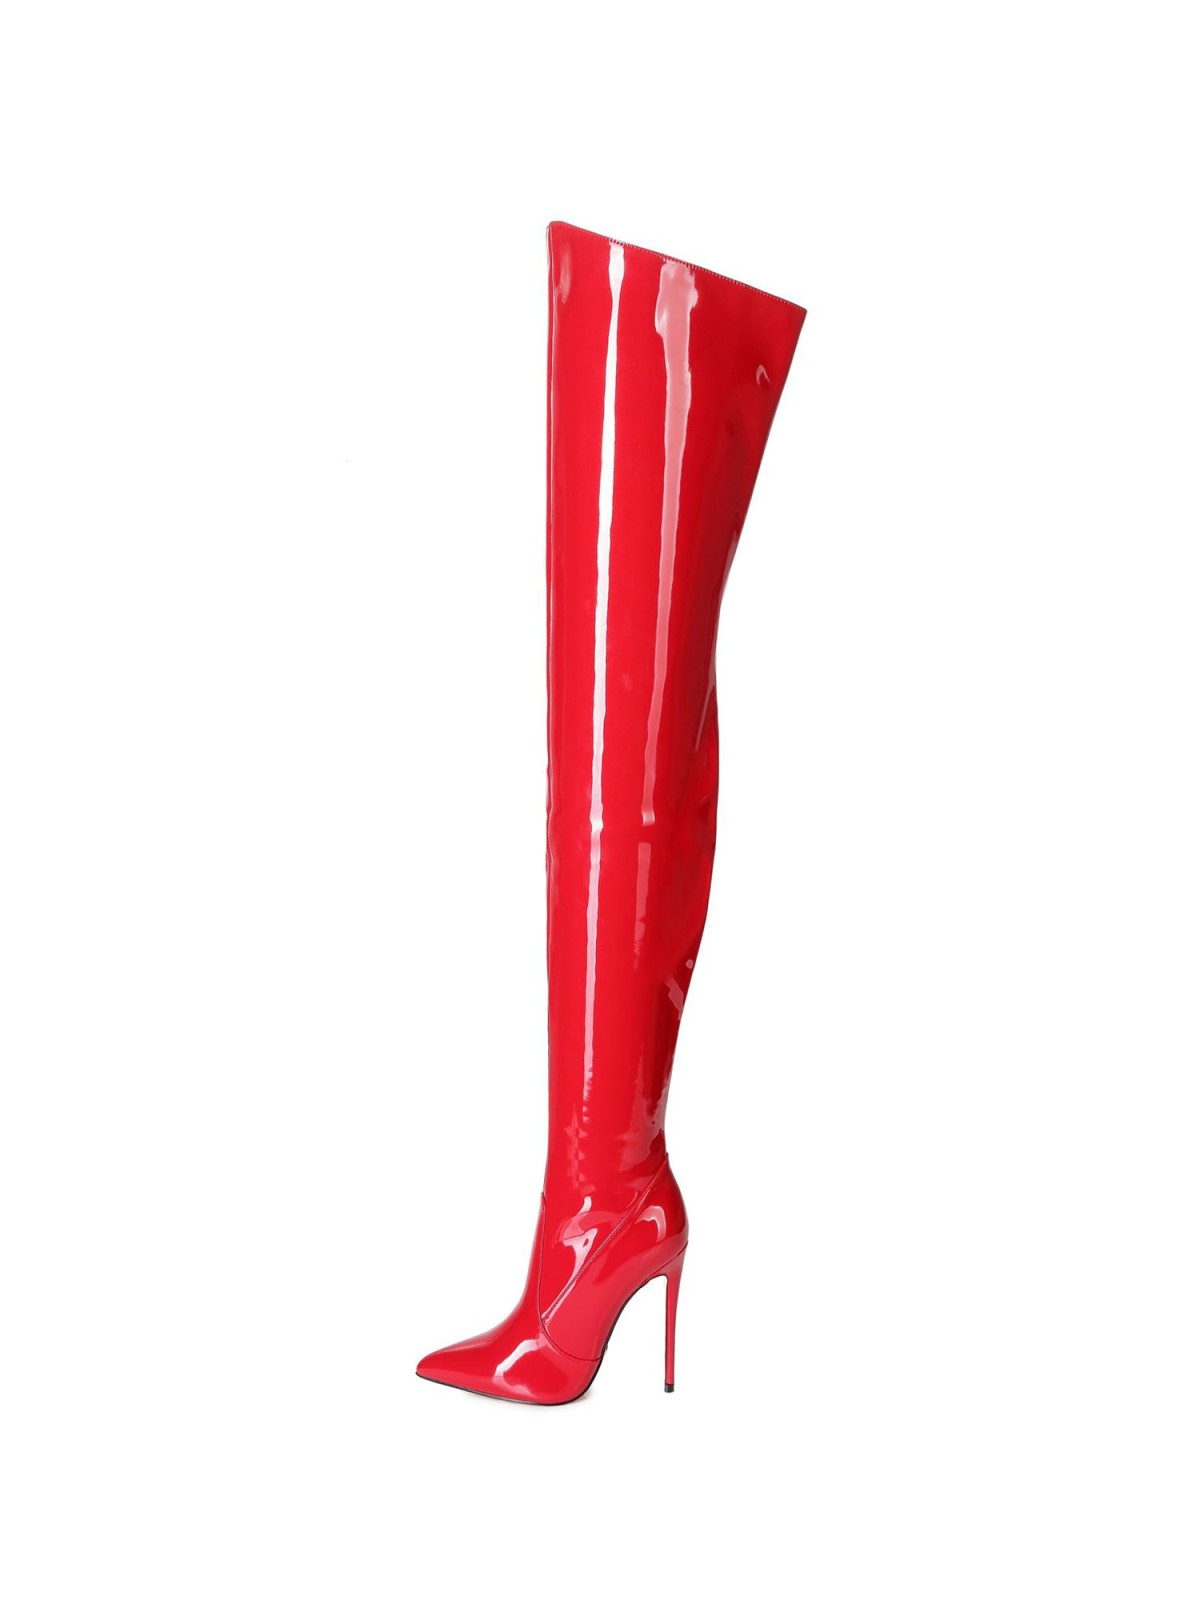 Giaro ARABELLA red shiny over-the-knee boots on high heel